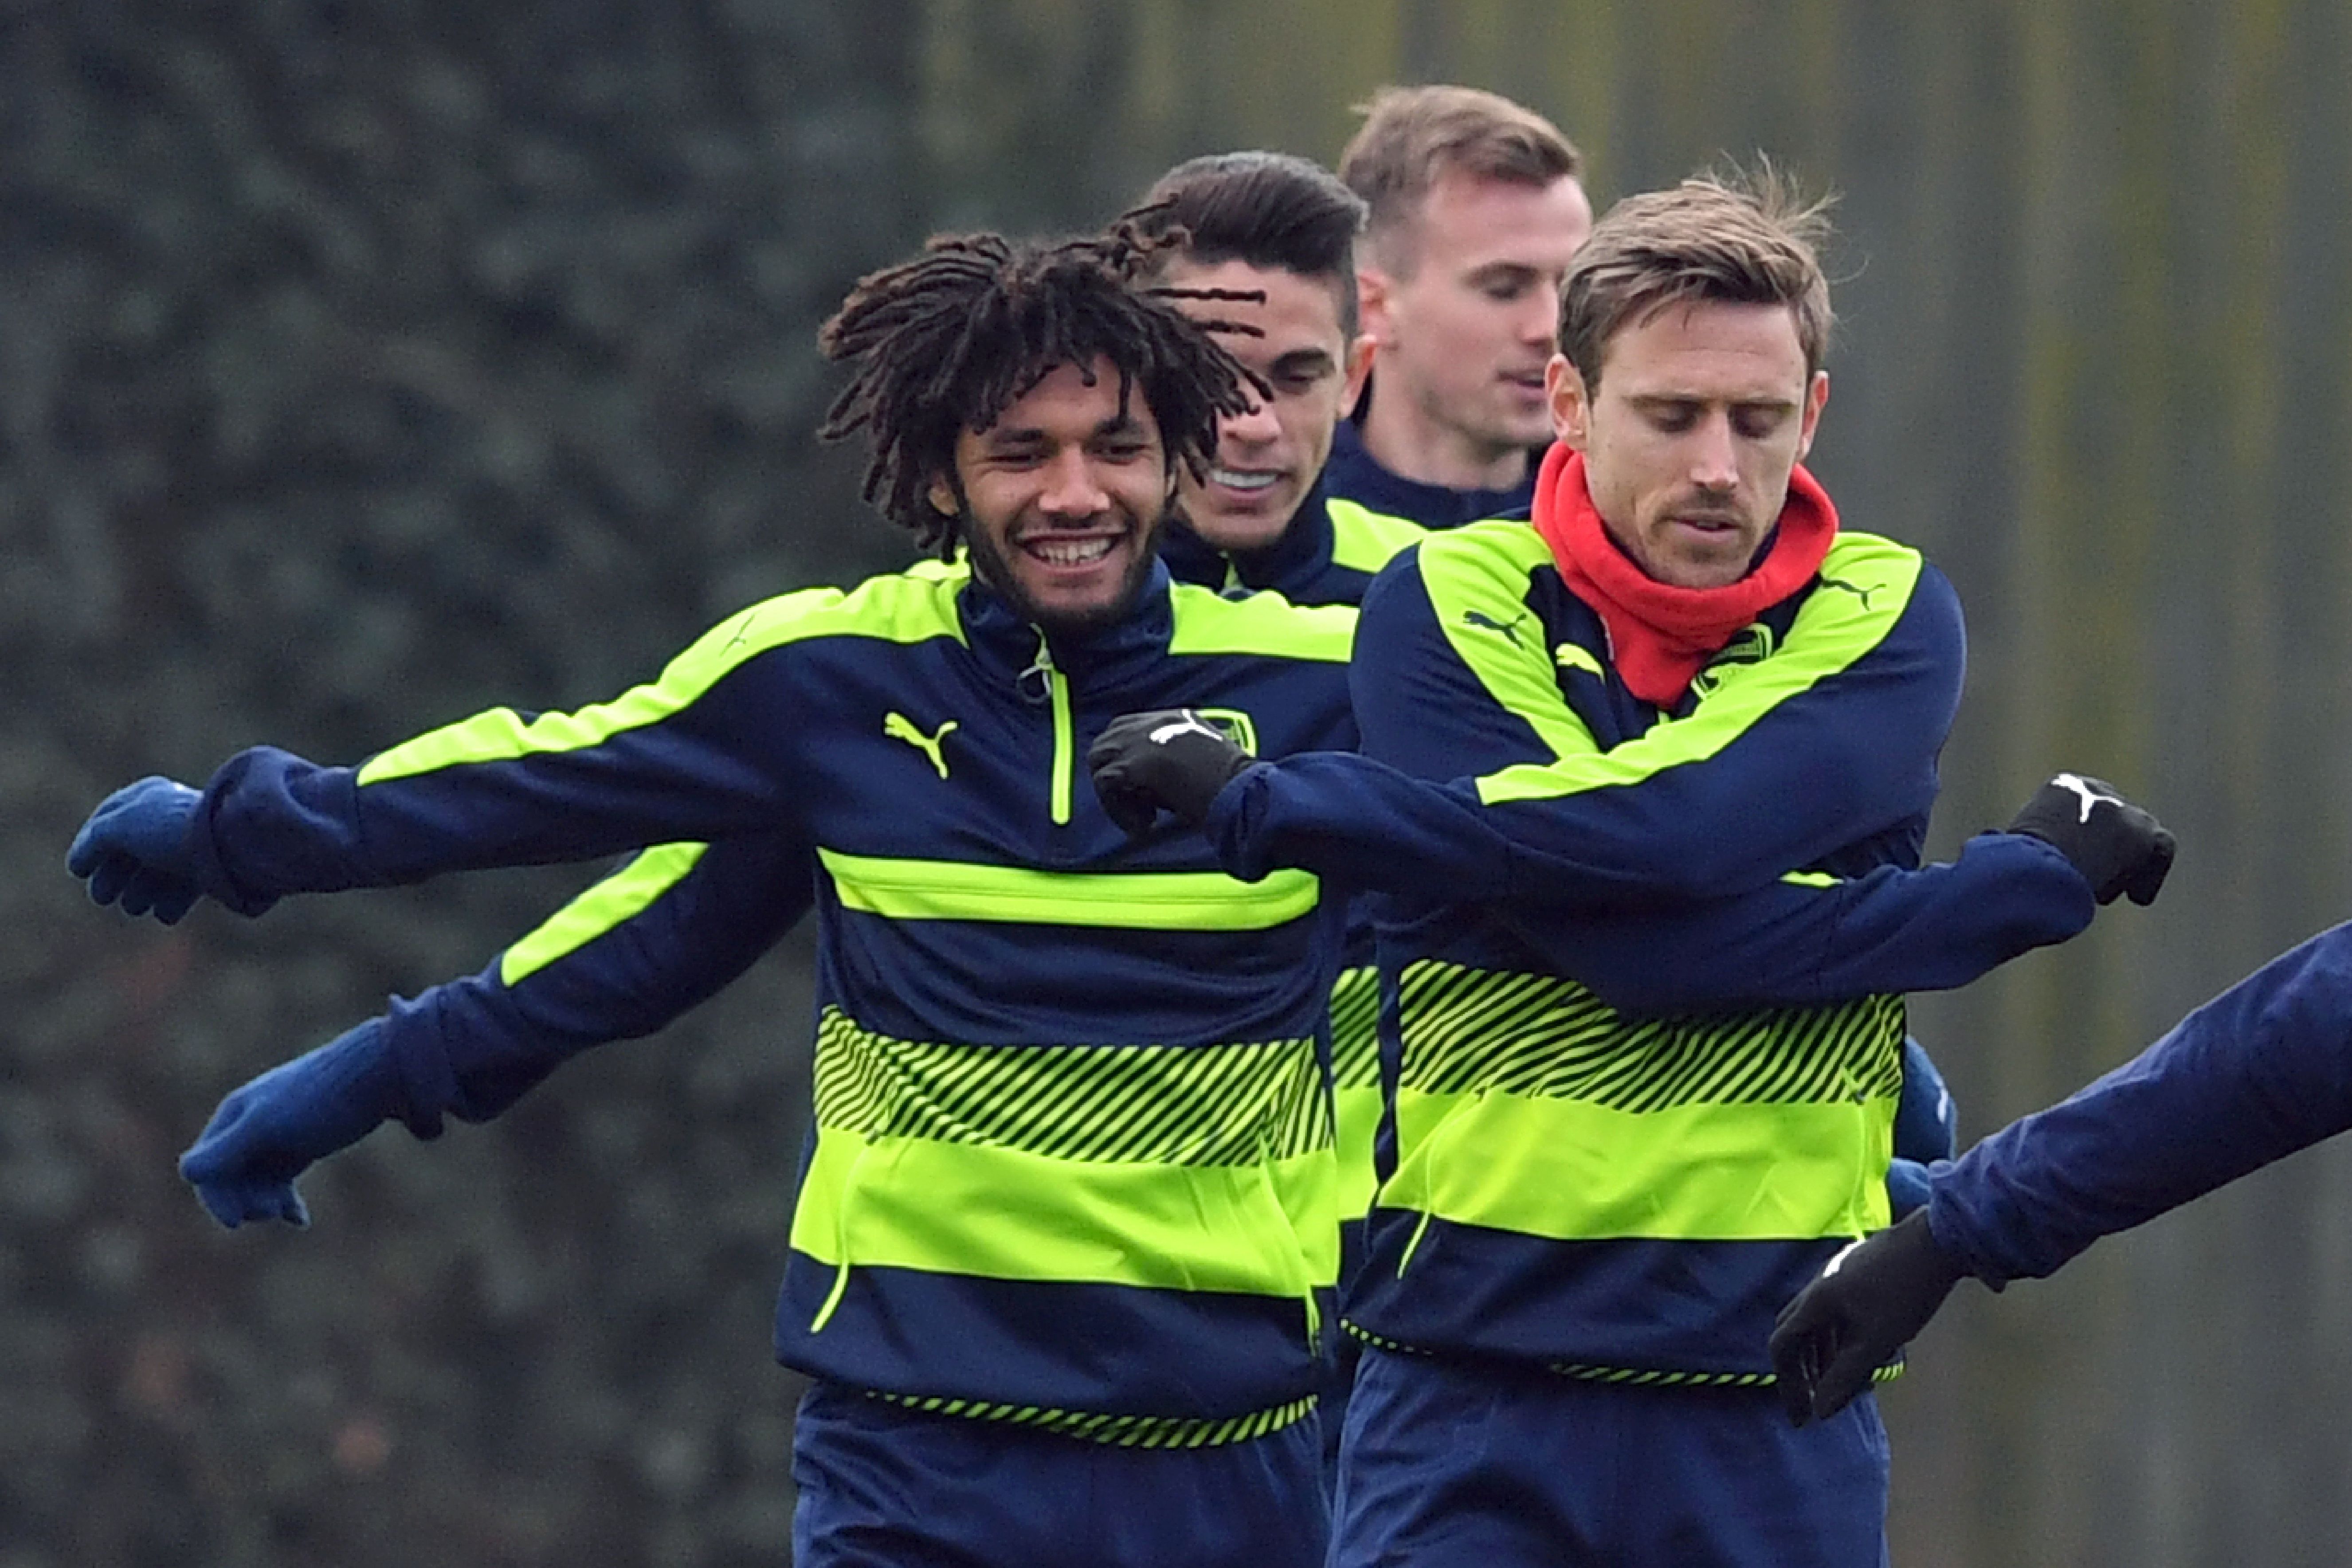 Arsenal's Egyptian midfielder Mohamed Elneny (L), Arsenal's Brazilian defender Gabriel (C), and Arsenal's Spanish defender Nacho Monreal (R) take part in a training session on the eve of their UEFA Champions League round of 16 1st leg football match against Bayern Munich, at Arsenal's London Colney training ground on February 14, 2017. / AFP / BEN STANSALL        (Photo credit should read BEN STANSALL/AFP/Getty Images)